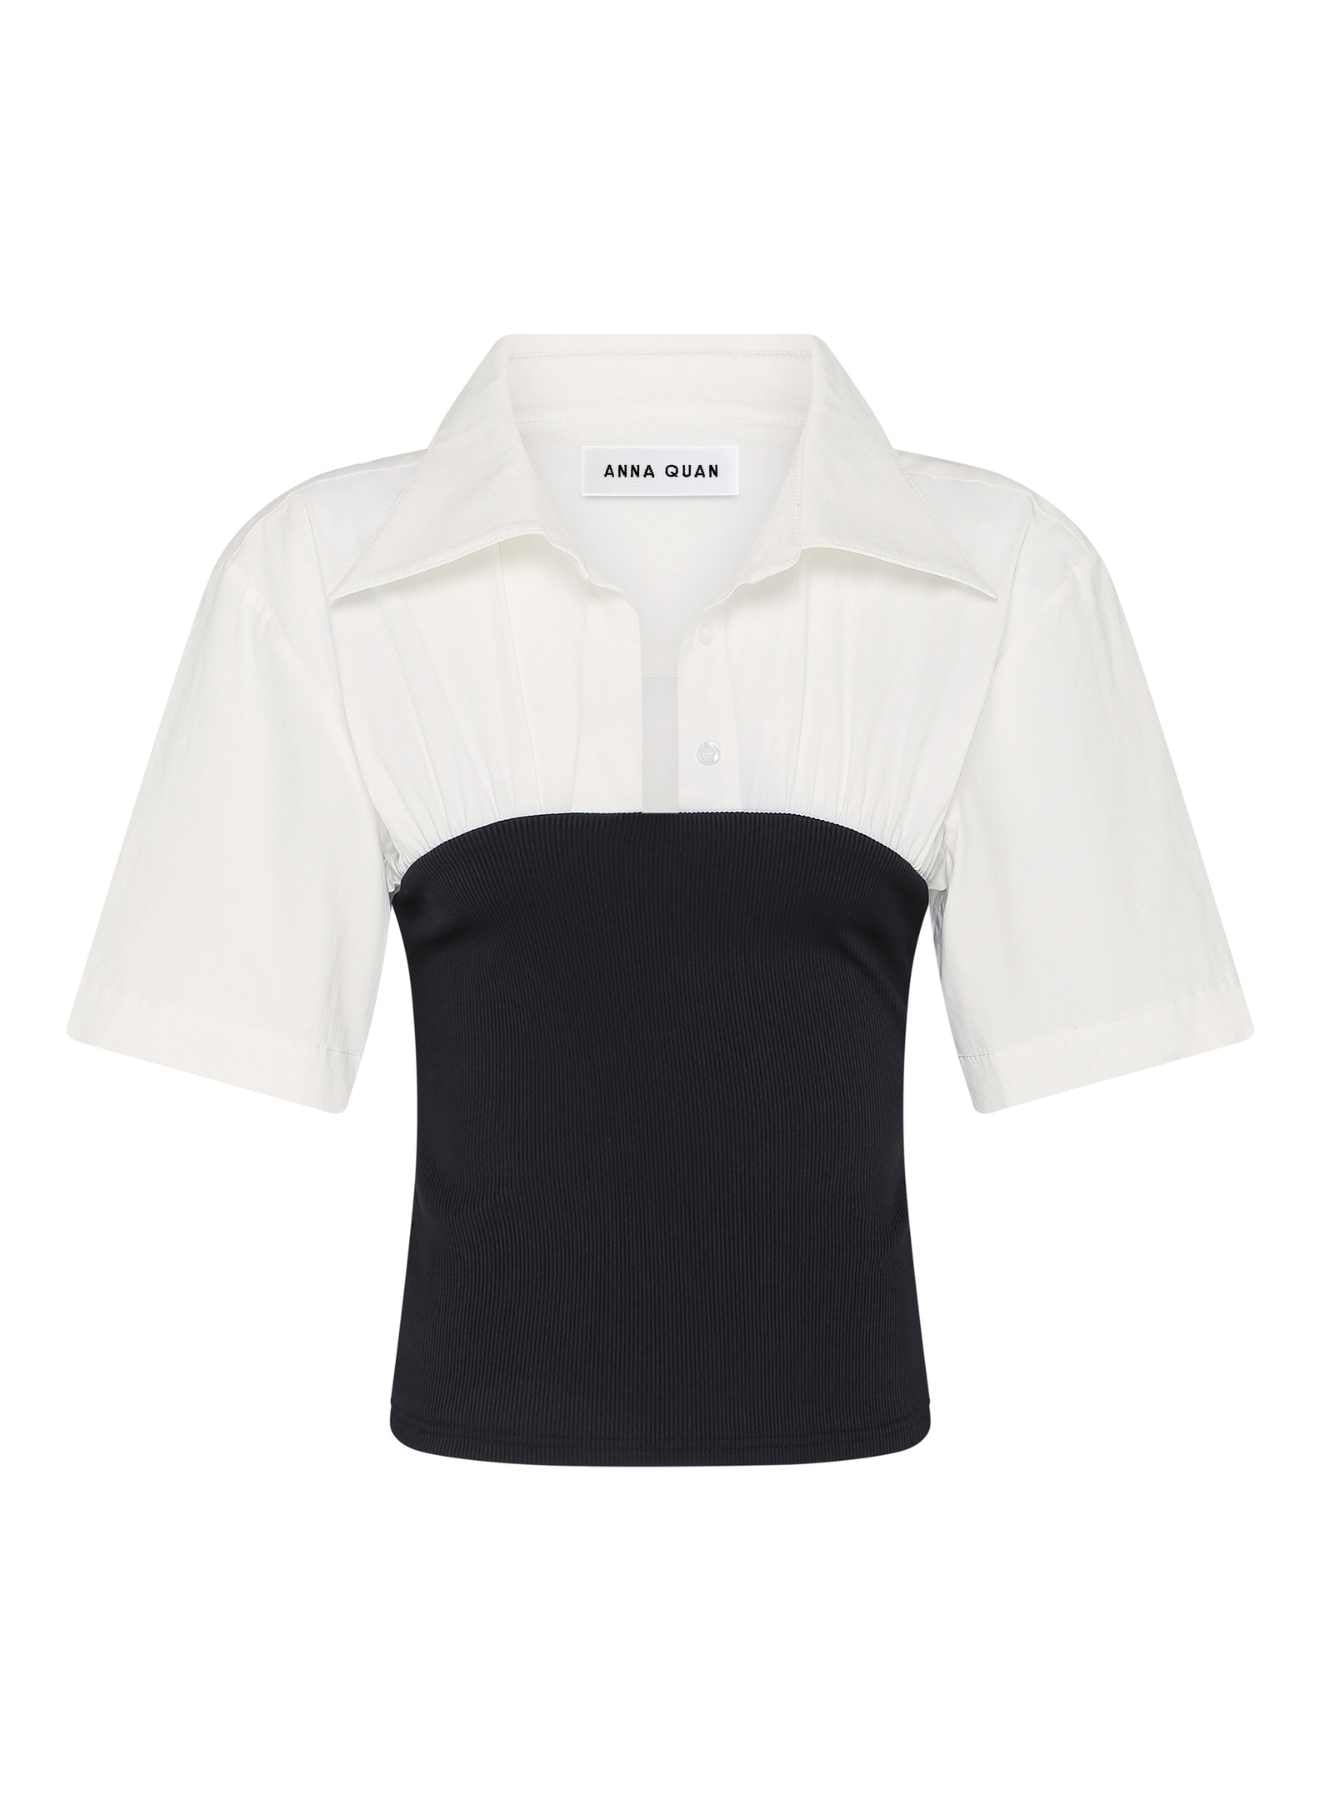 ANNA QUAN Wren Mixed Media Shirt in cotton poplin and contrast jersey ribbed knit. Shirt-style neckline, short sleeves, side zipper closure. Ideal for a classic and versatile everyday or work look.